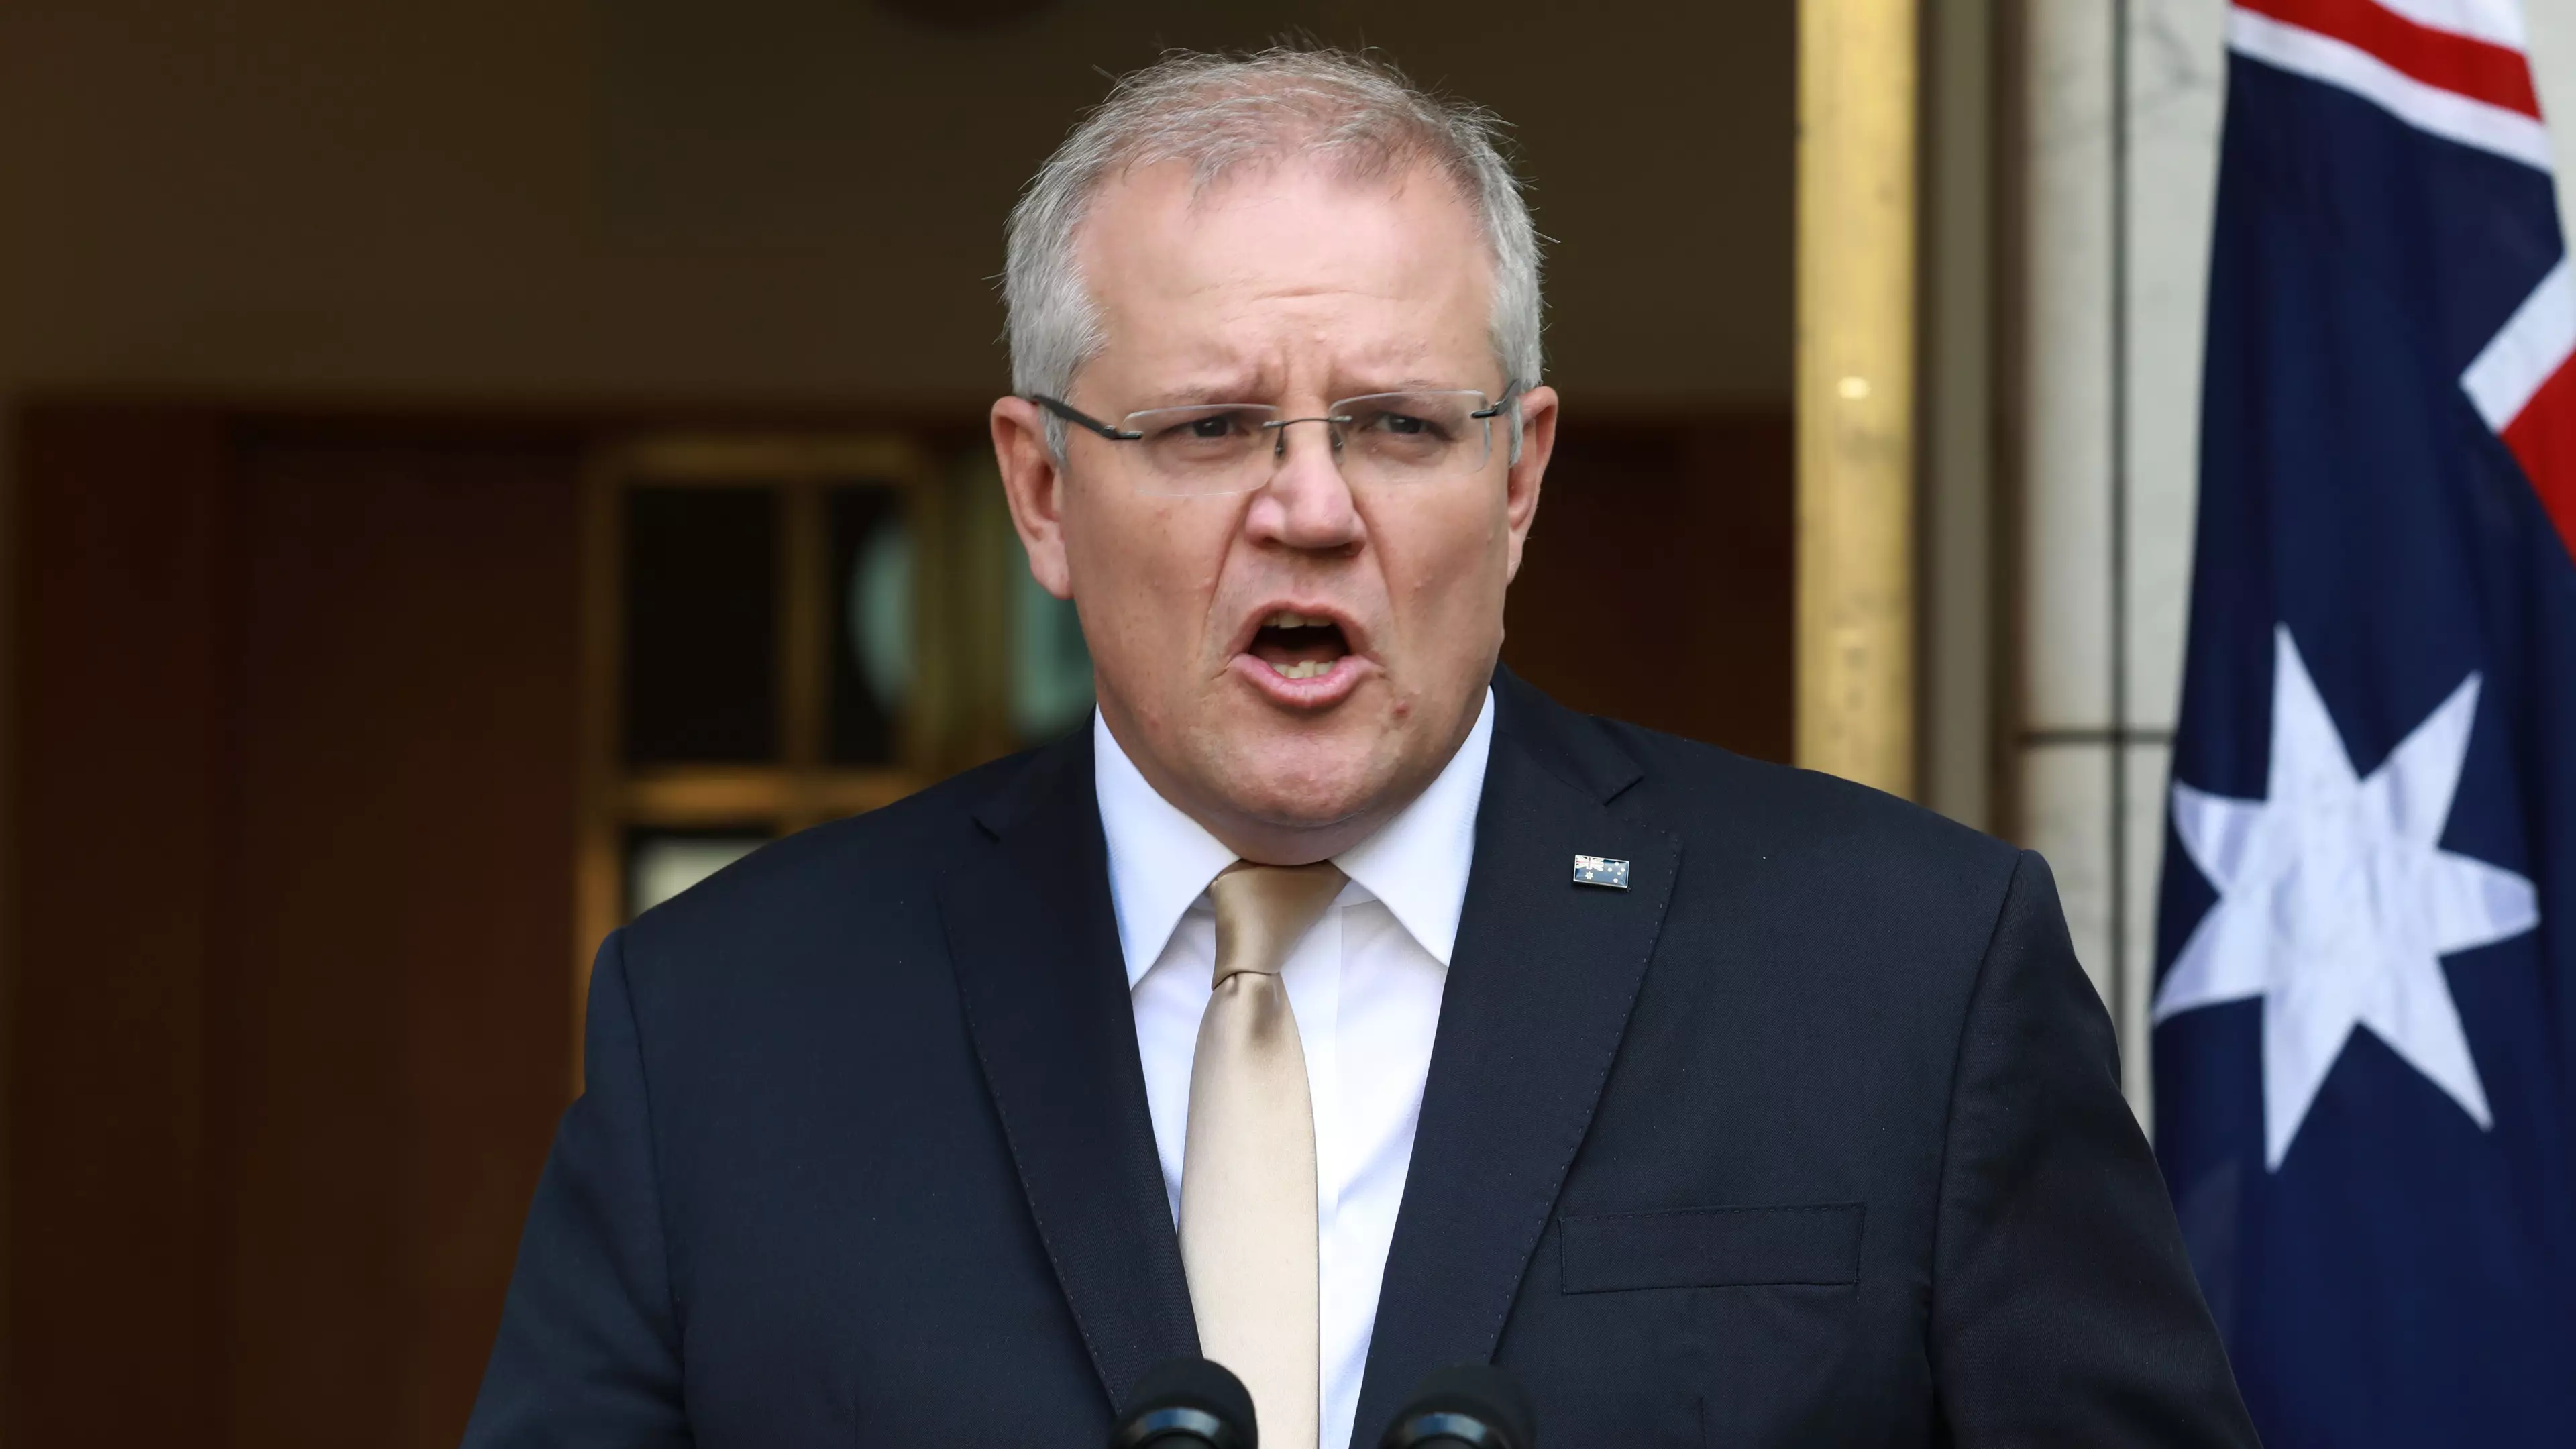 Scott Morrison Rejects Calls For Australian Politicians To Take A Pay Cut Due To Coronavirus